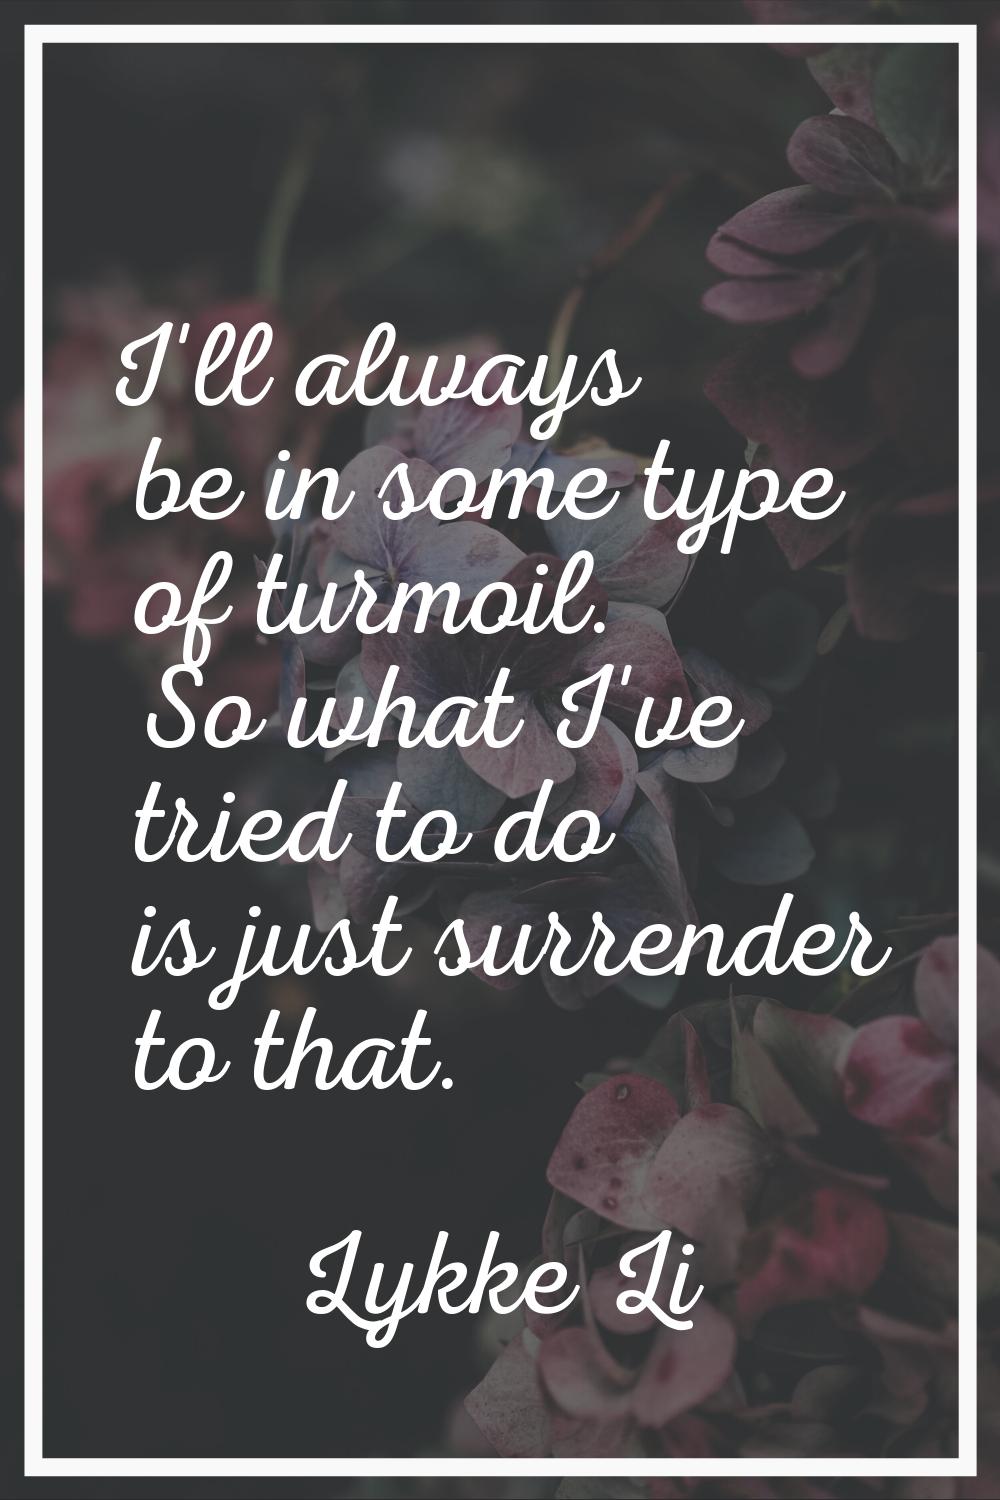 I'll always be in some type of turmoil. So what I've tried to do is just surrender to that.